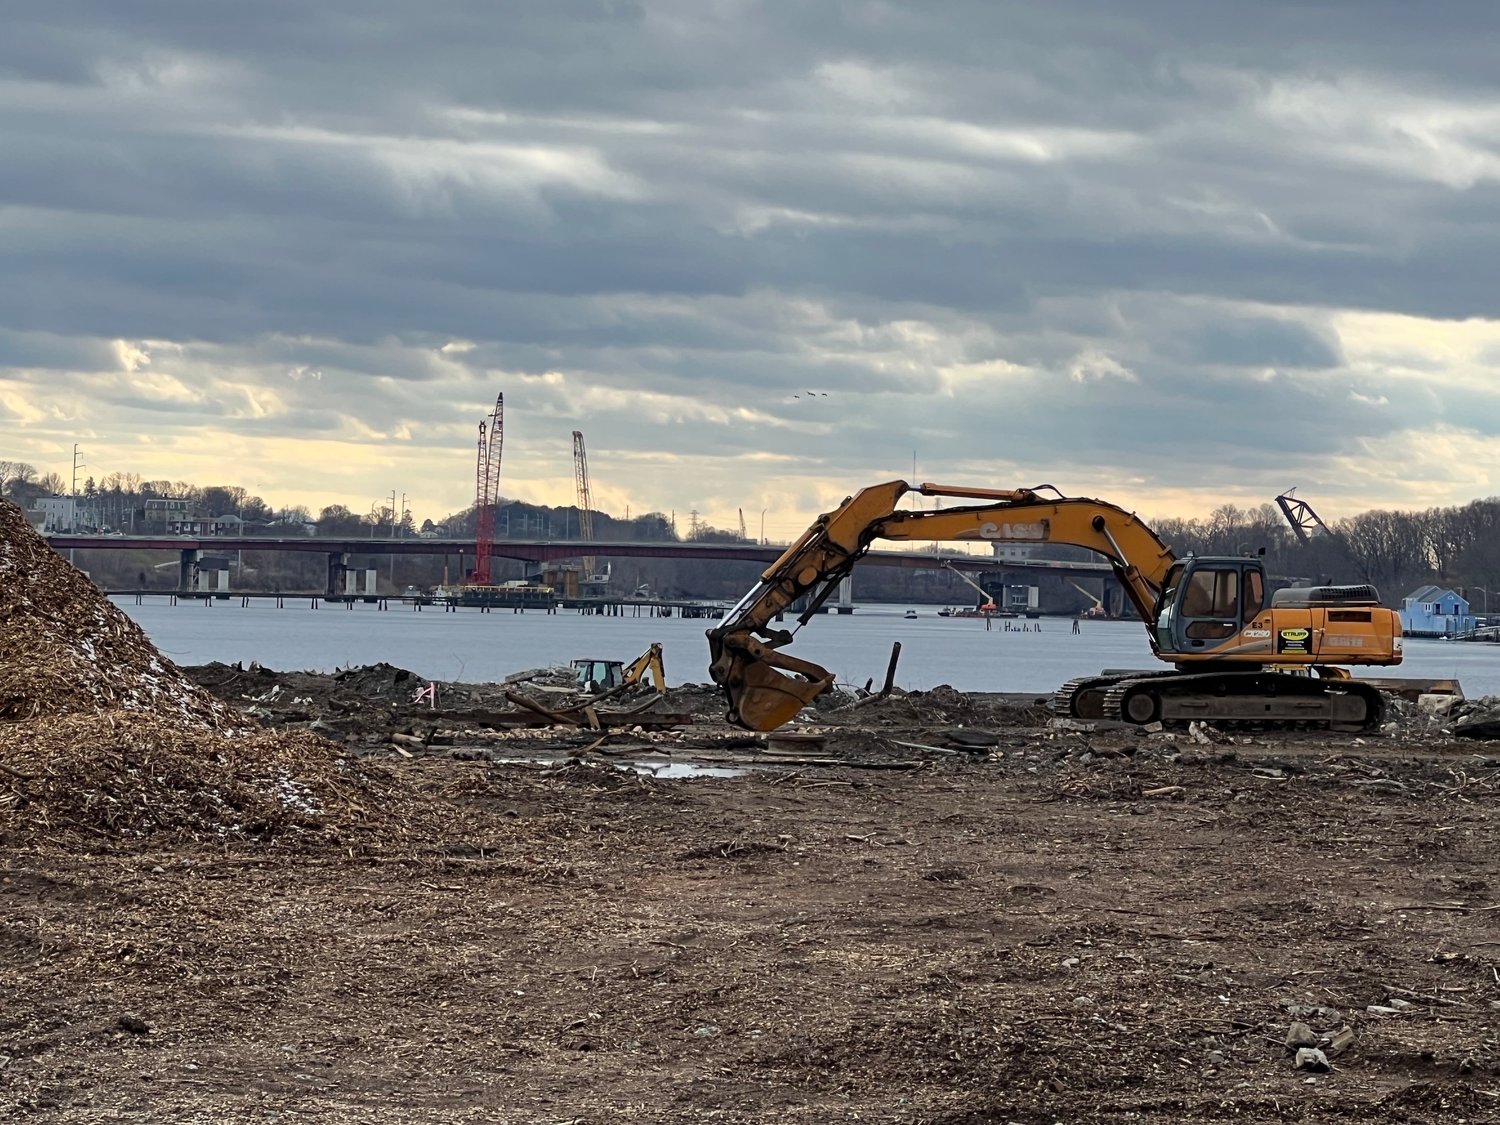 A look at the "coastal" portion of the "East Point" development  in Rumford south towards the Henderson Bridge.